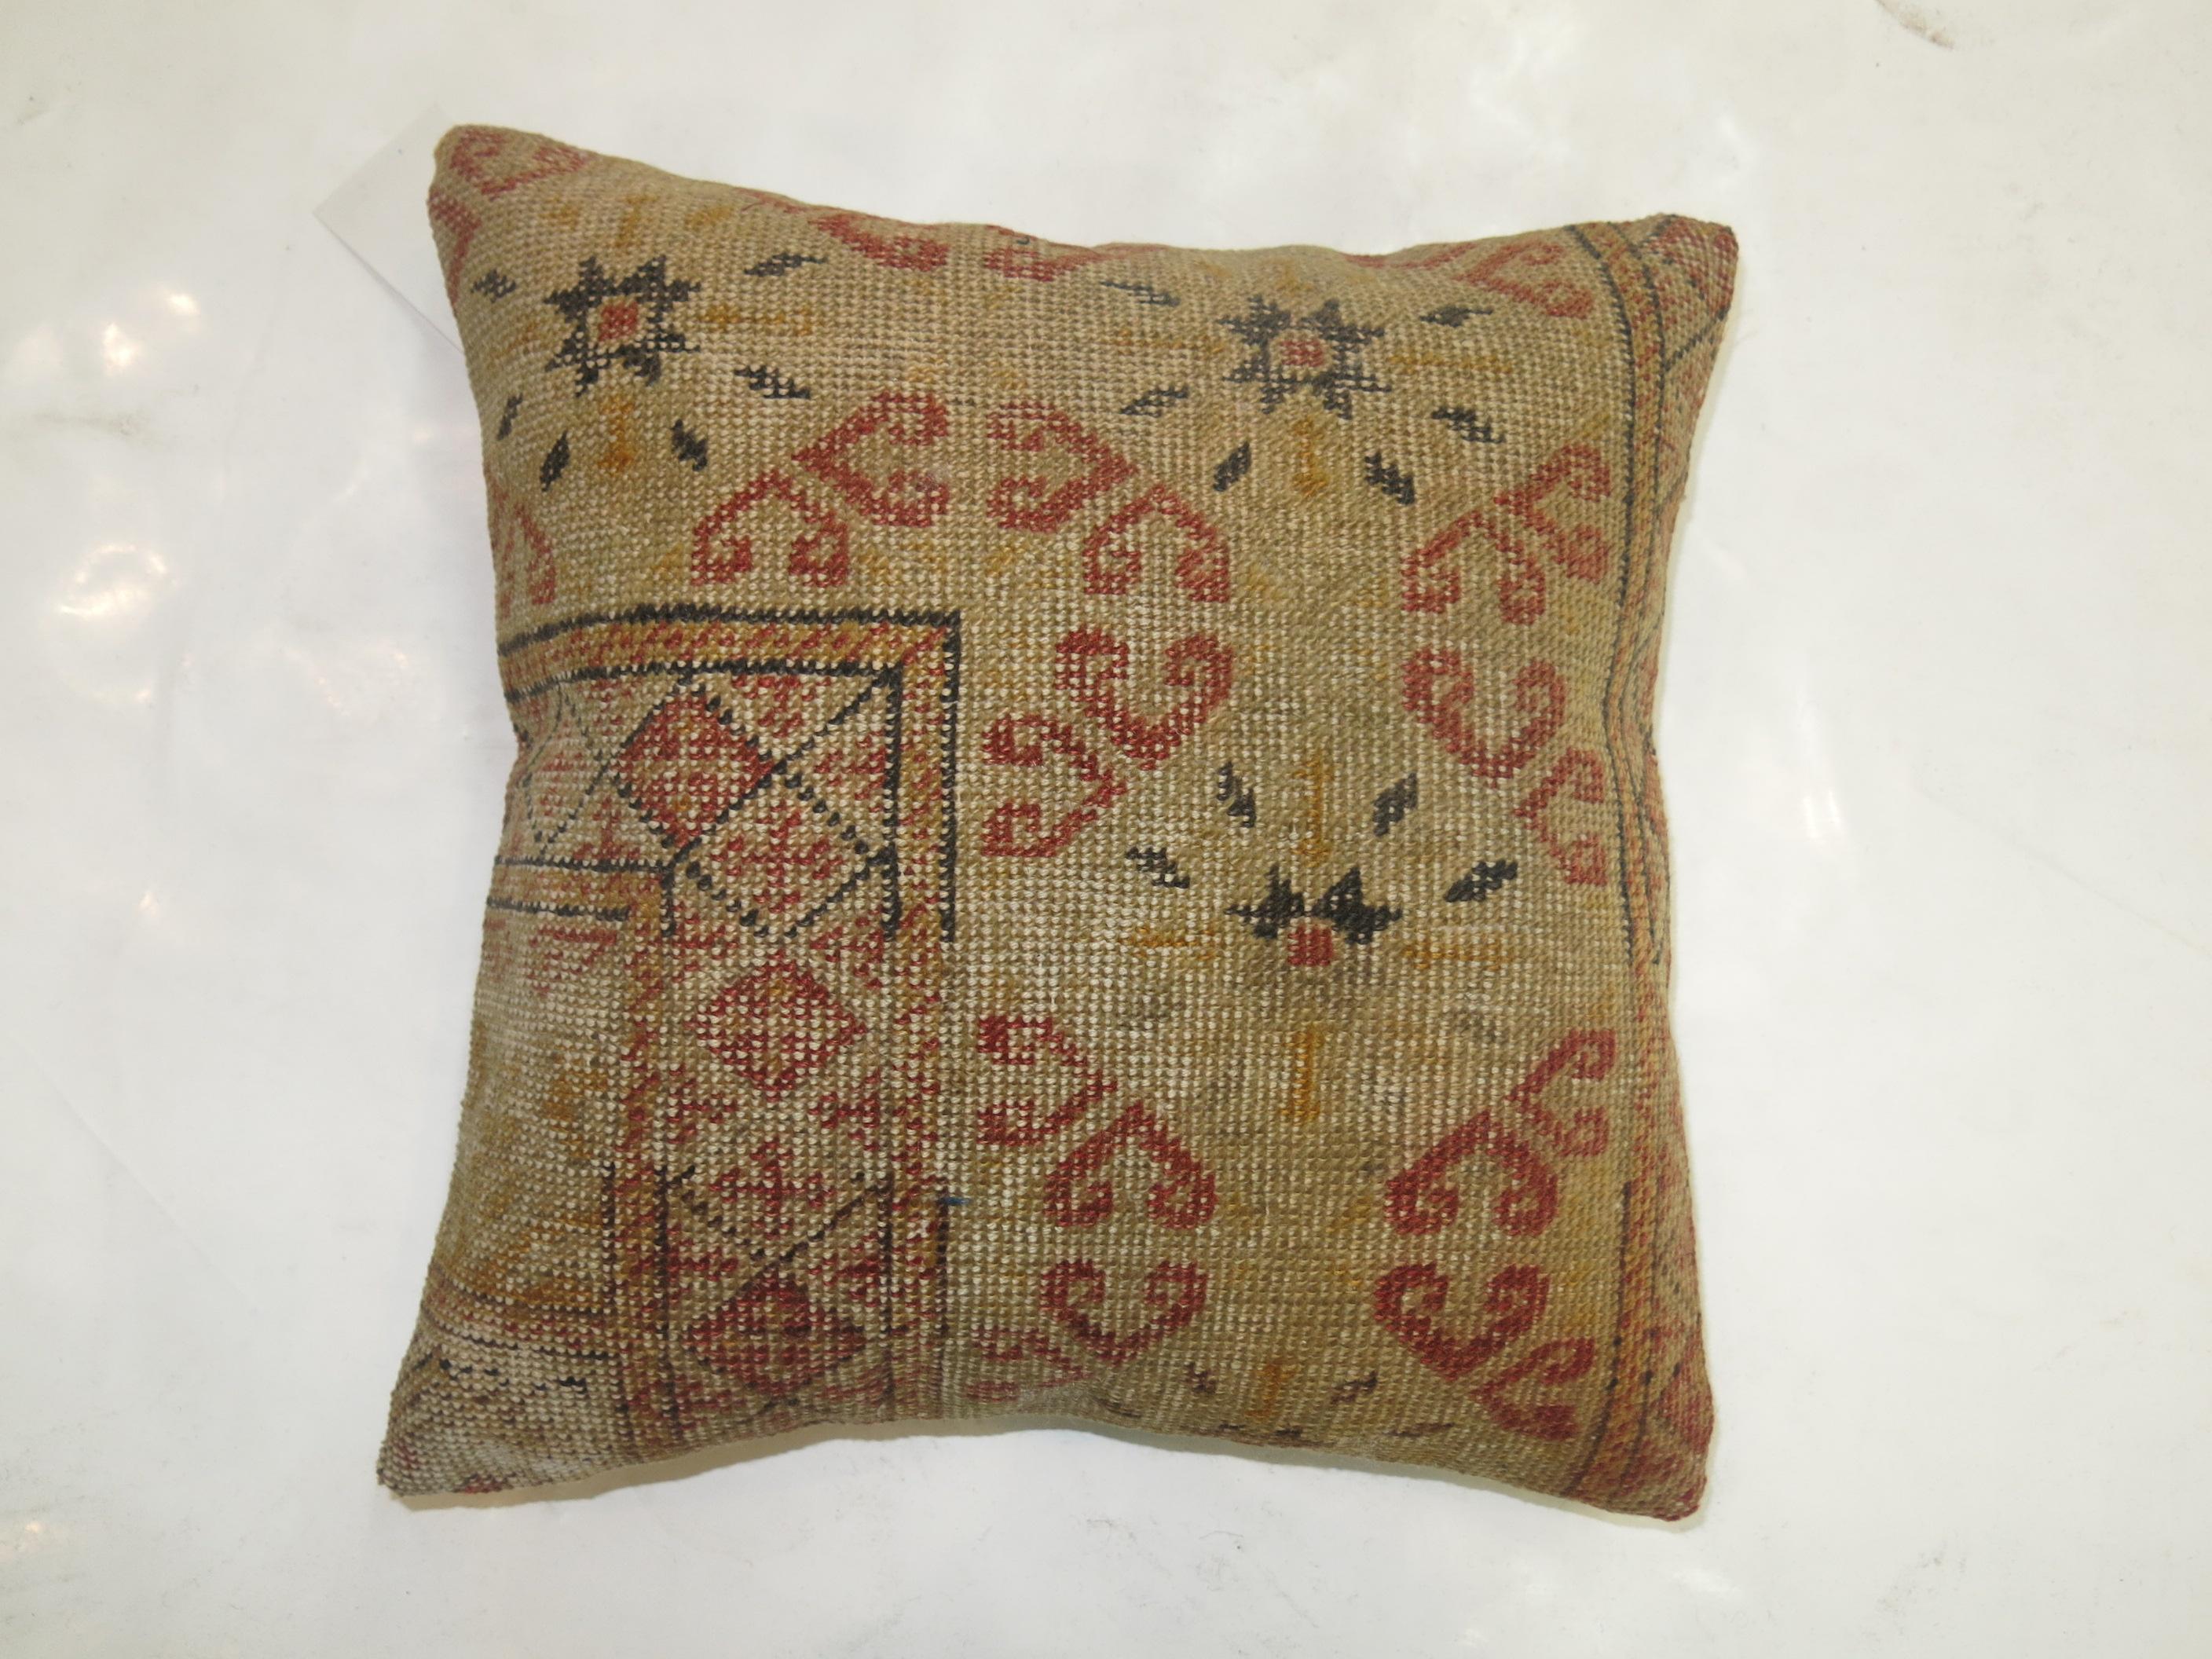 Pillow made from an early 20th century turkish rug. poly fill insert provided with a zipper closure
16'' x 16''